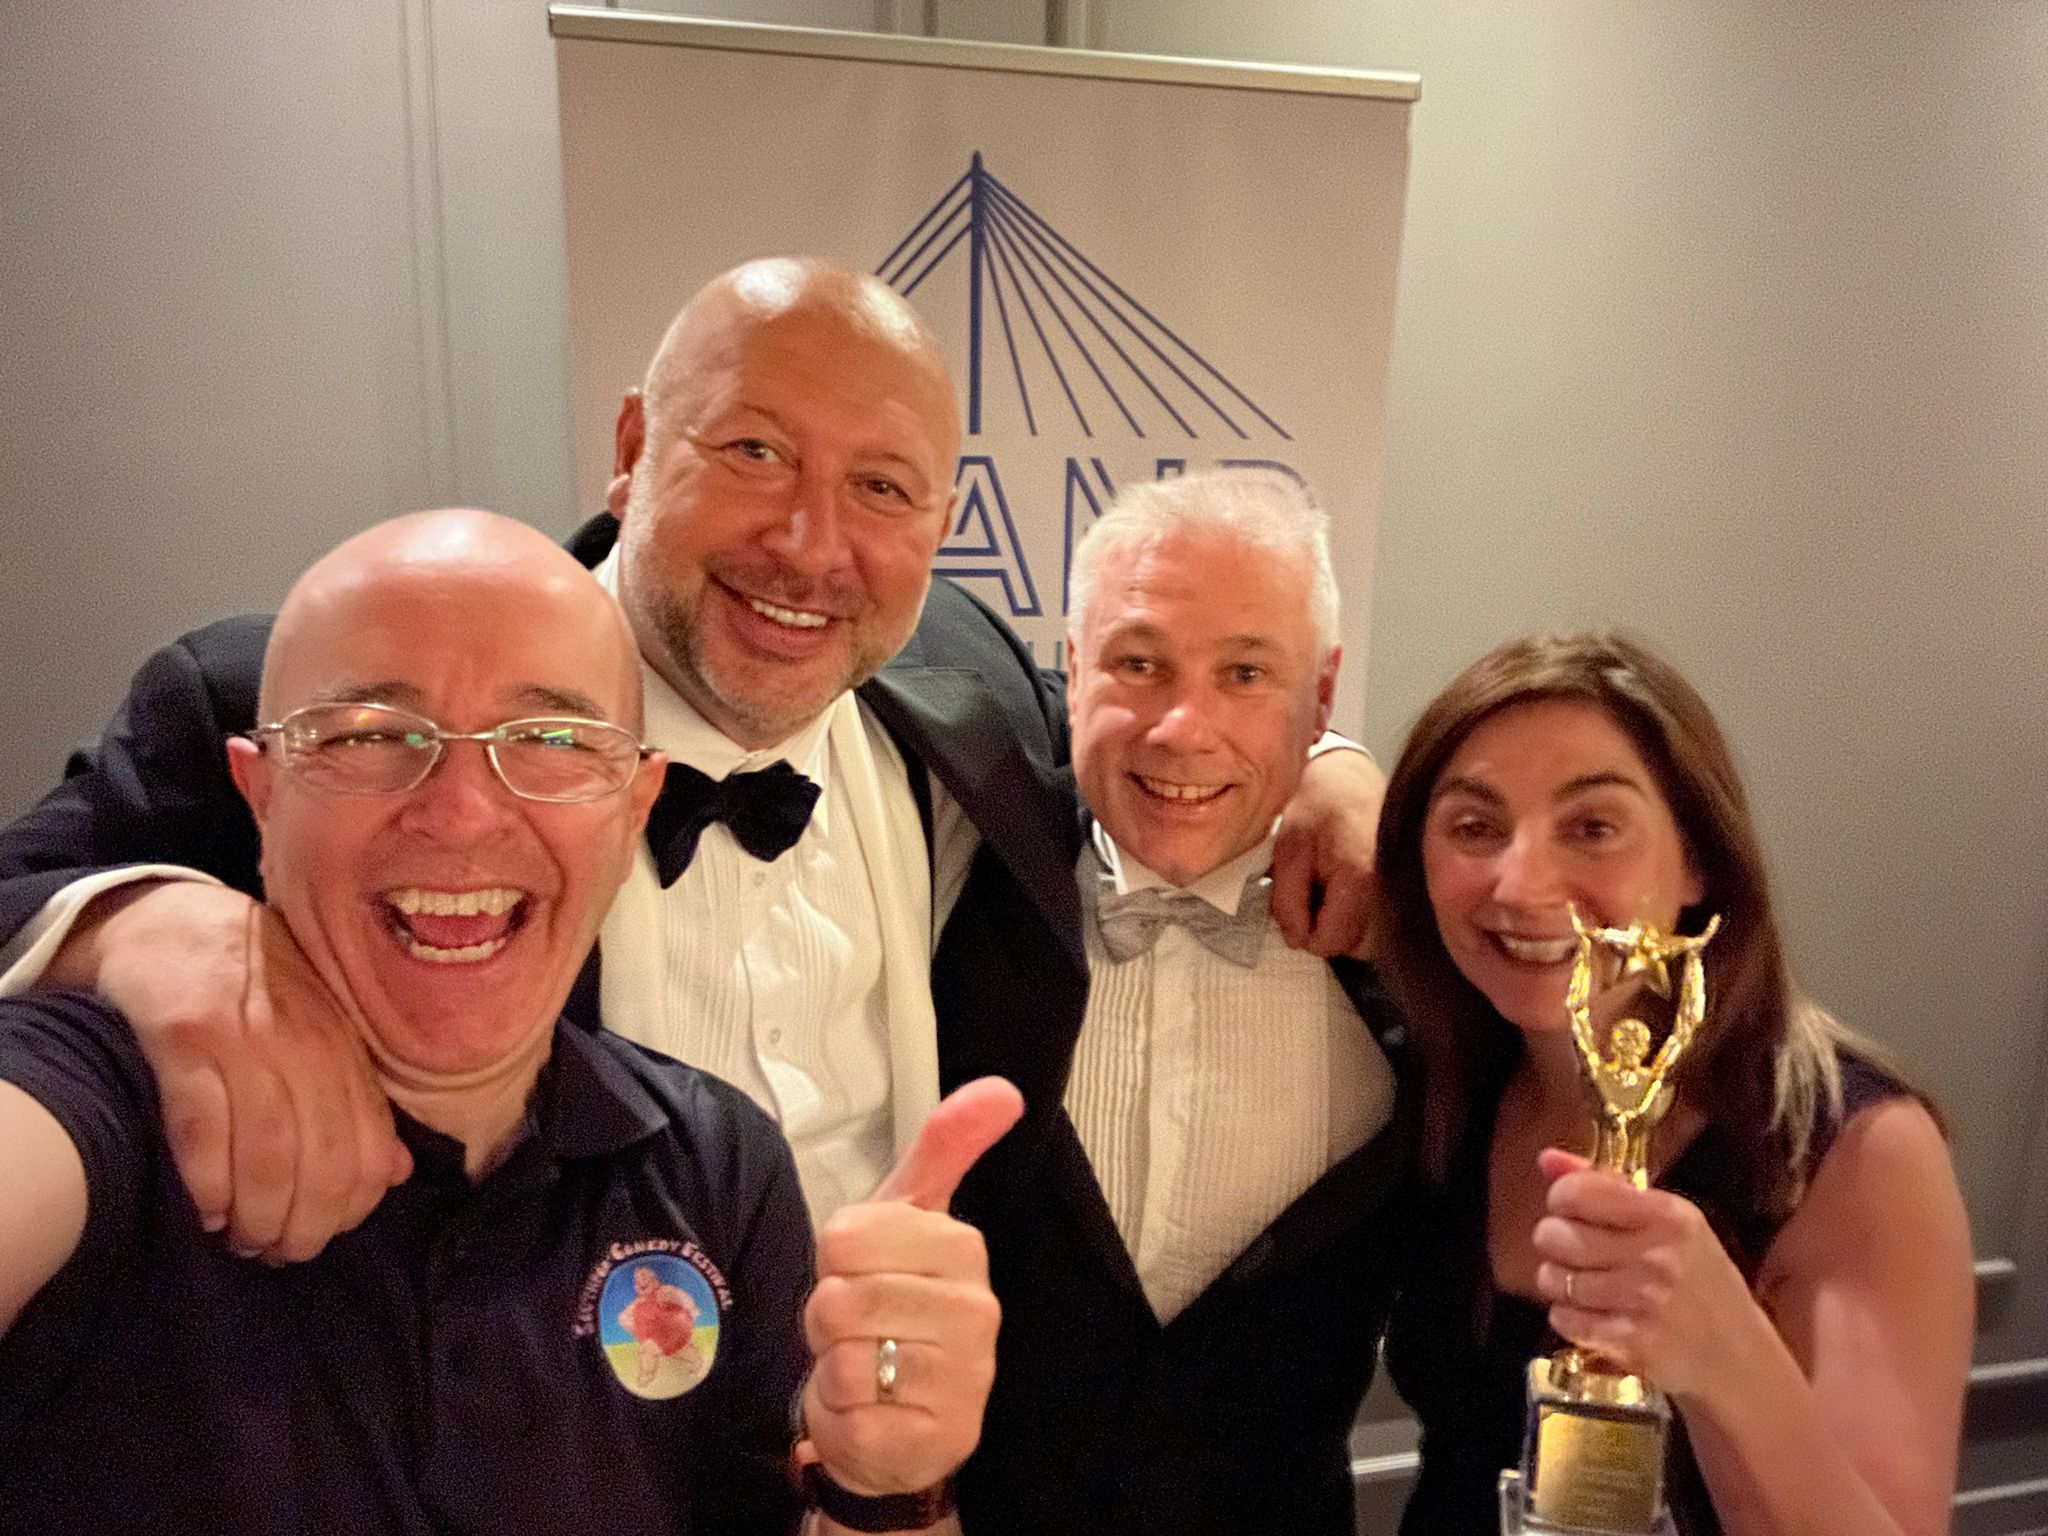 Brendan Riley (left) and Val Brady (right) from Southport Comedy Festival / Big Comedy won the Business In The Community Award at the 2023 Pride Of Sefton Awards. They are pictured with event organisers Andrew Mikhail (second left) and Andrew Brown